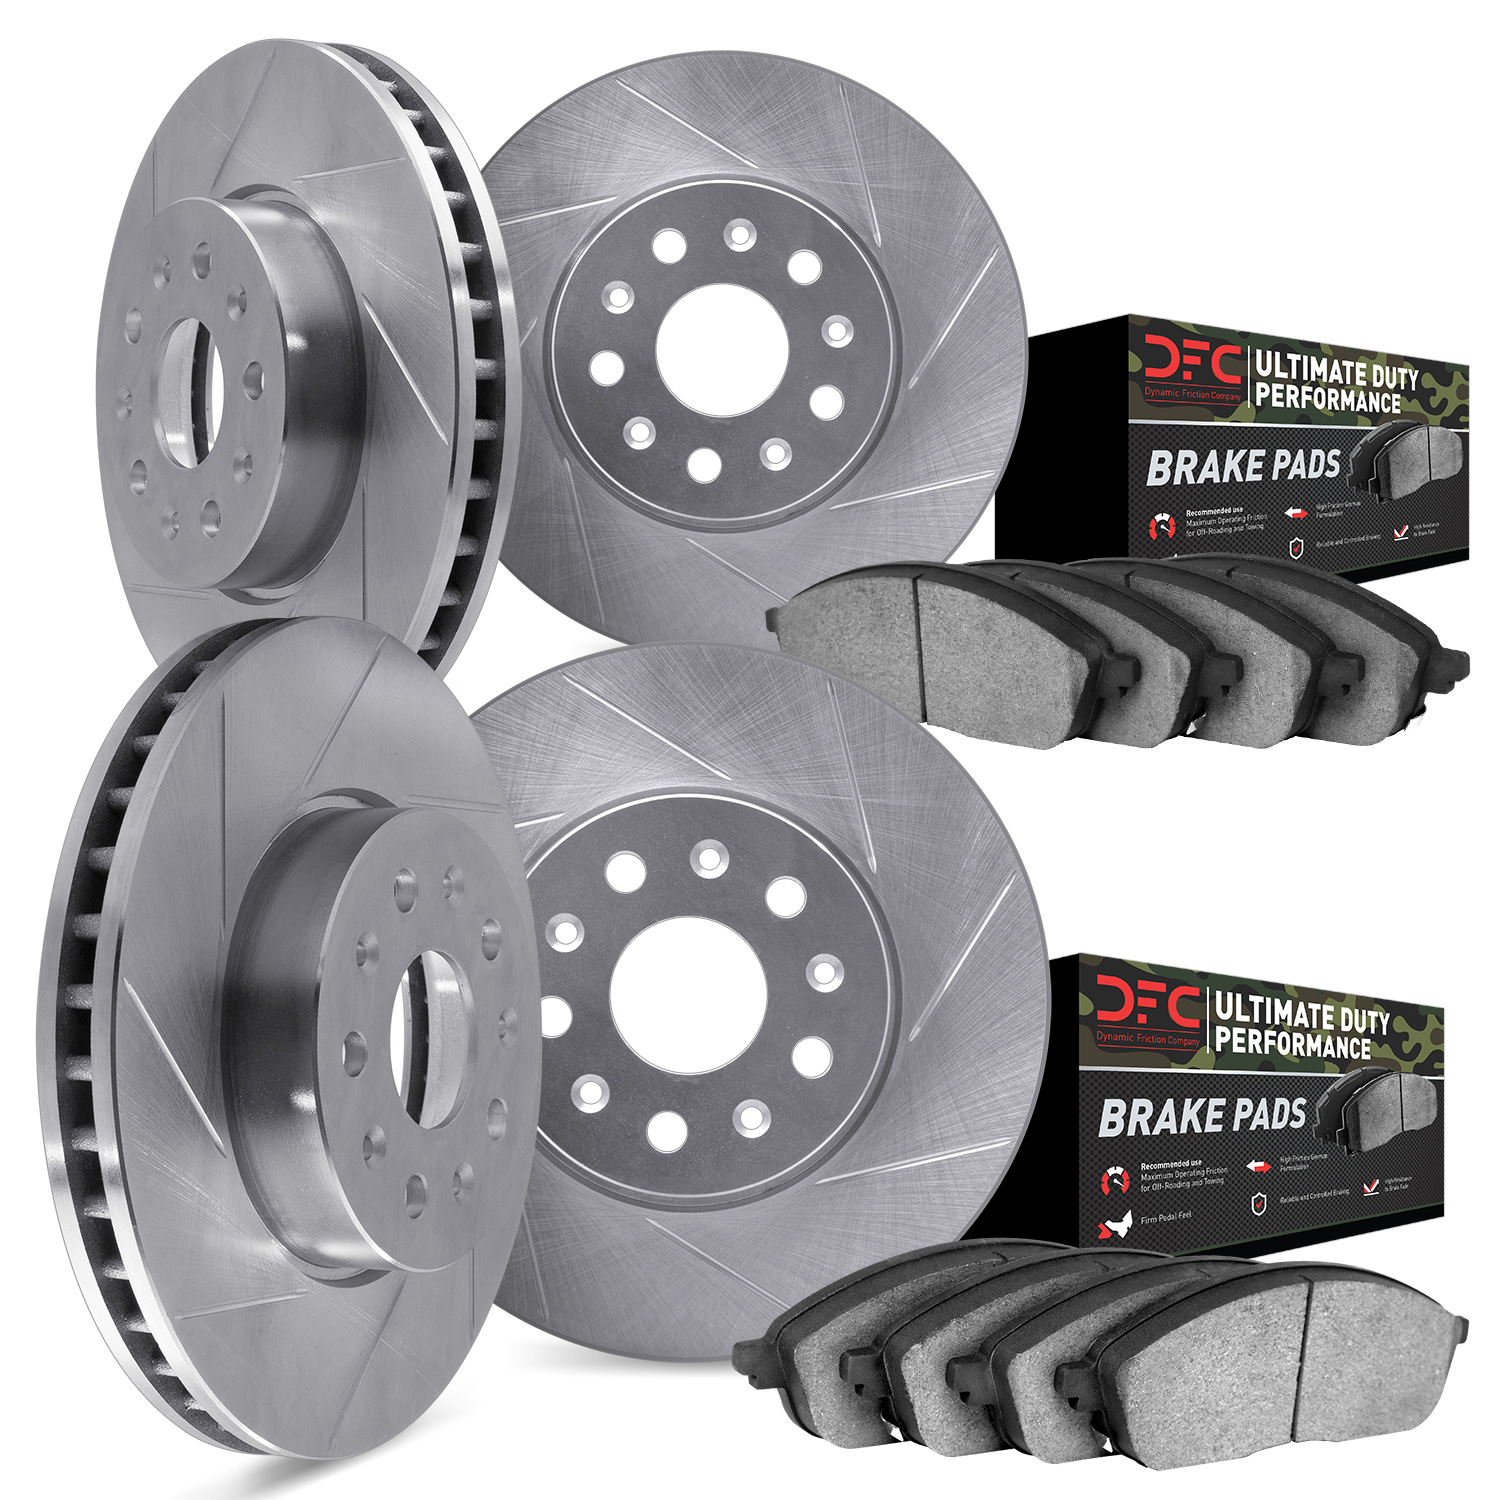 5404-42005 Slotted Brake Rotors with Ultimate-Duty Brake Pads Kit [Silver], Fits Select Mopar, Position: Front and Rear